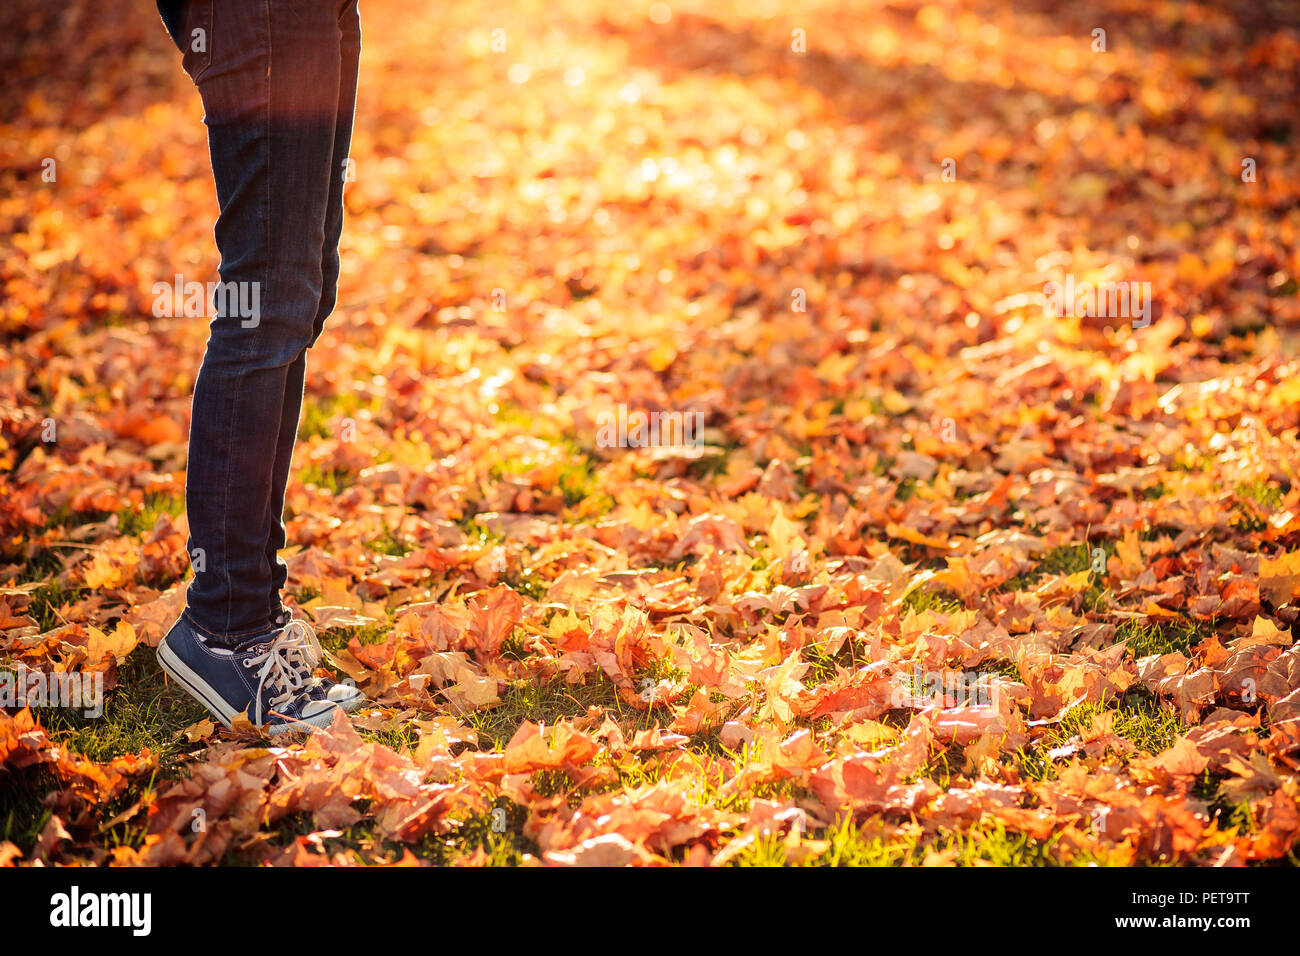 Feet of a woman standing on the orange autumn leaves with warm backlight Stock Photo